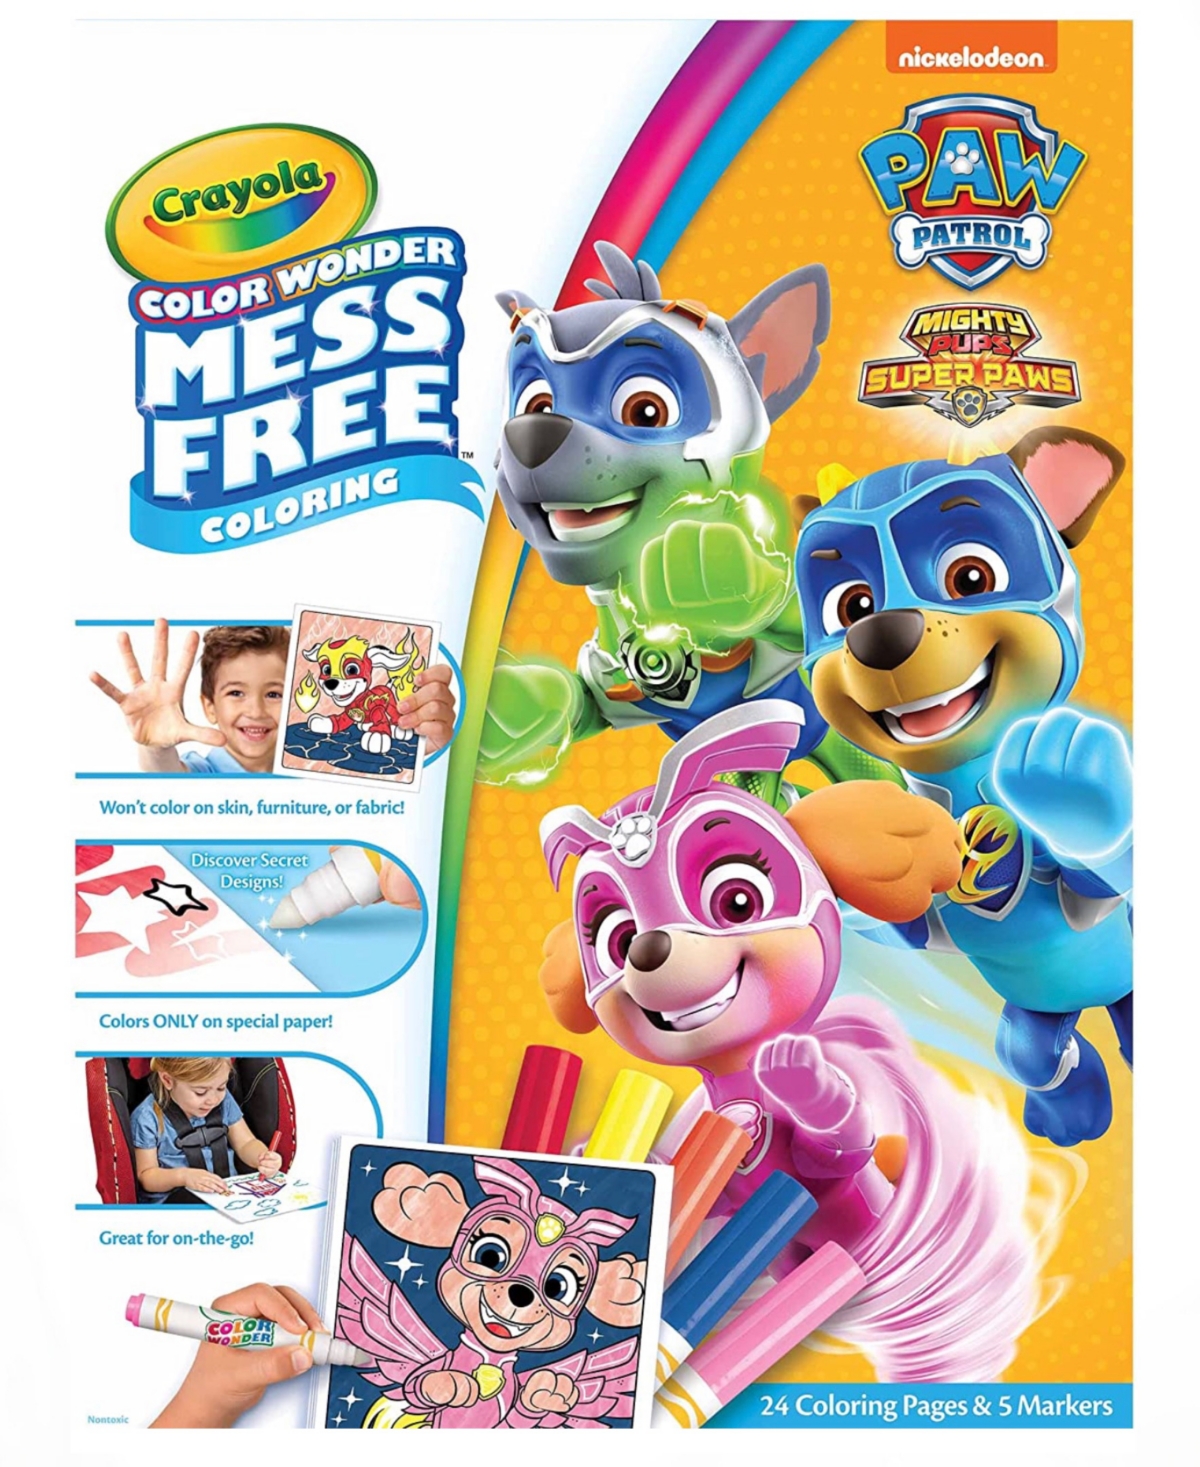 Mess Free "Paw Patrol, Super Paws" Adventures 18 Pages of Fun Games Fold lope - Multi Colored Plastic